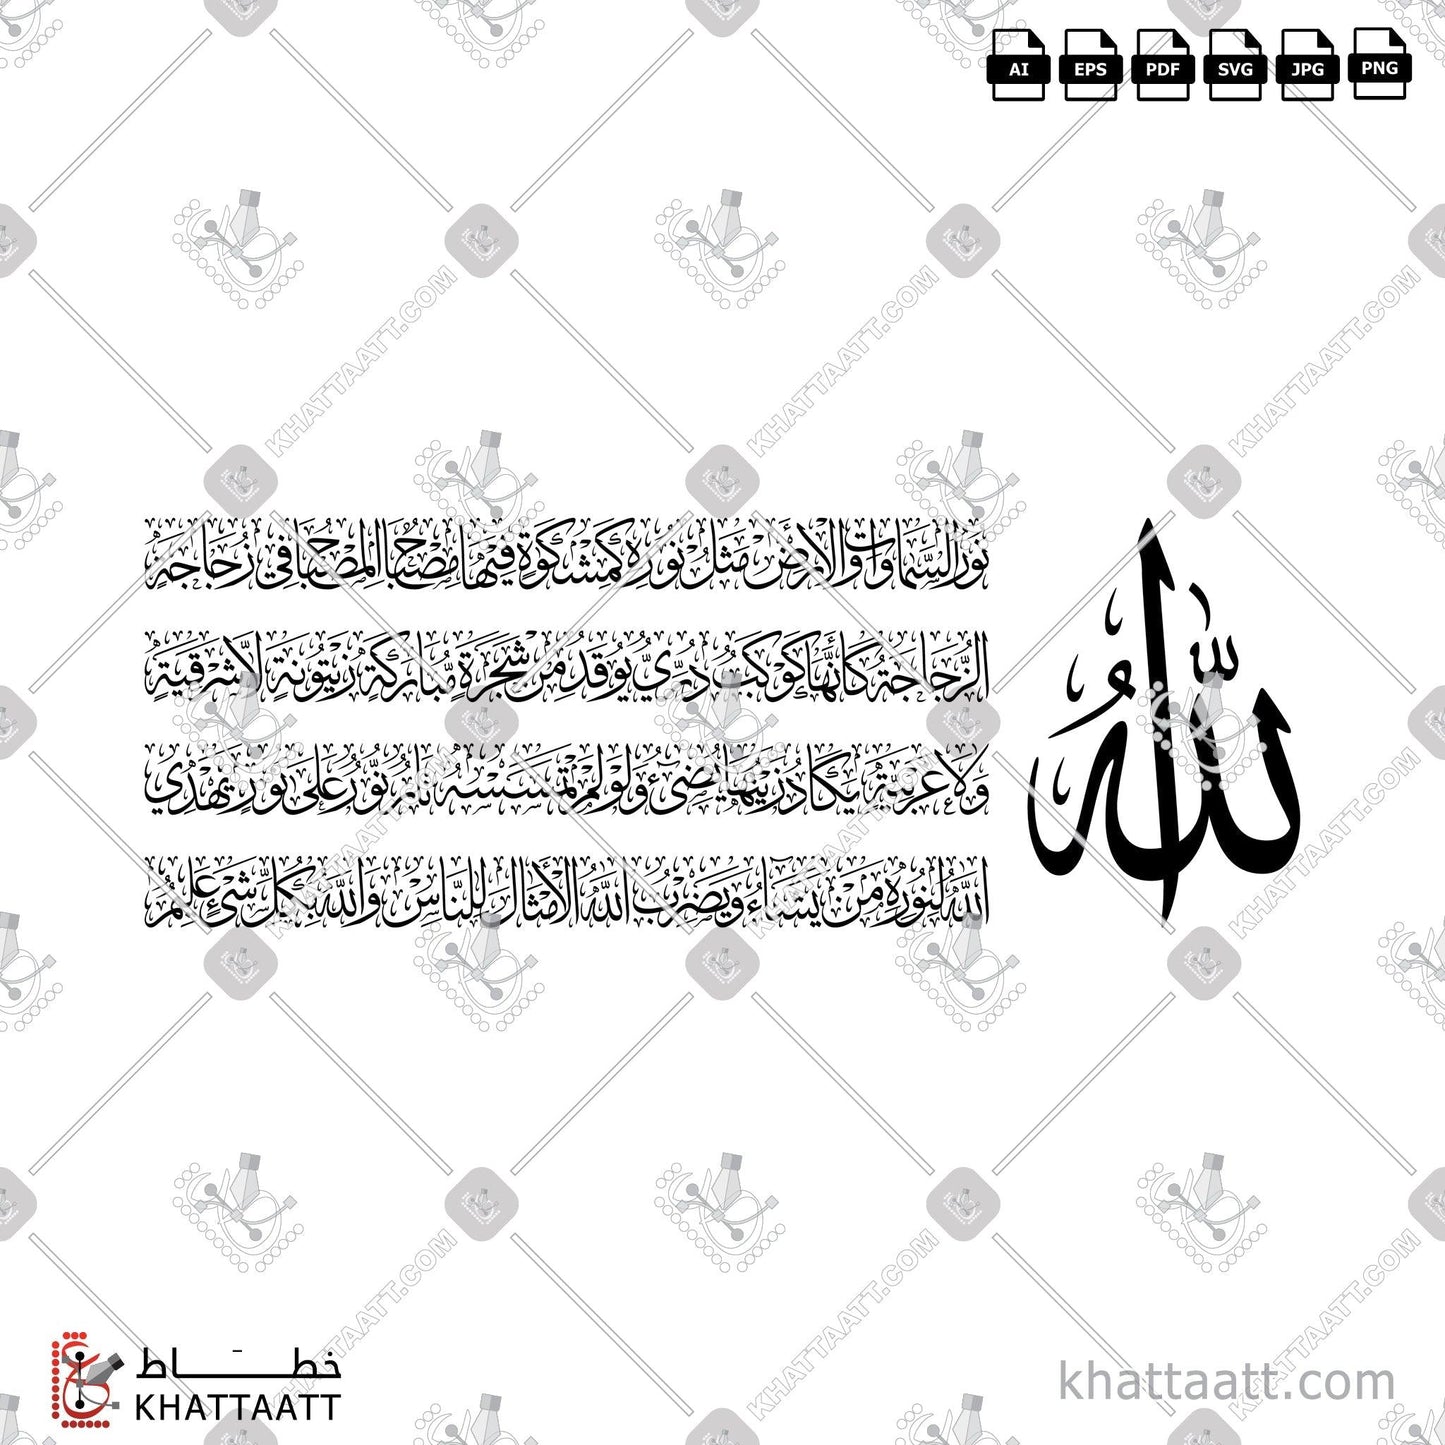 Download Arabic Calligraphy of Ayat An-Noor - آية النور in Thuluth - خط الثلث in vector and .png